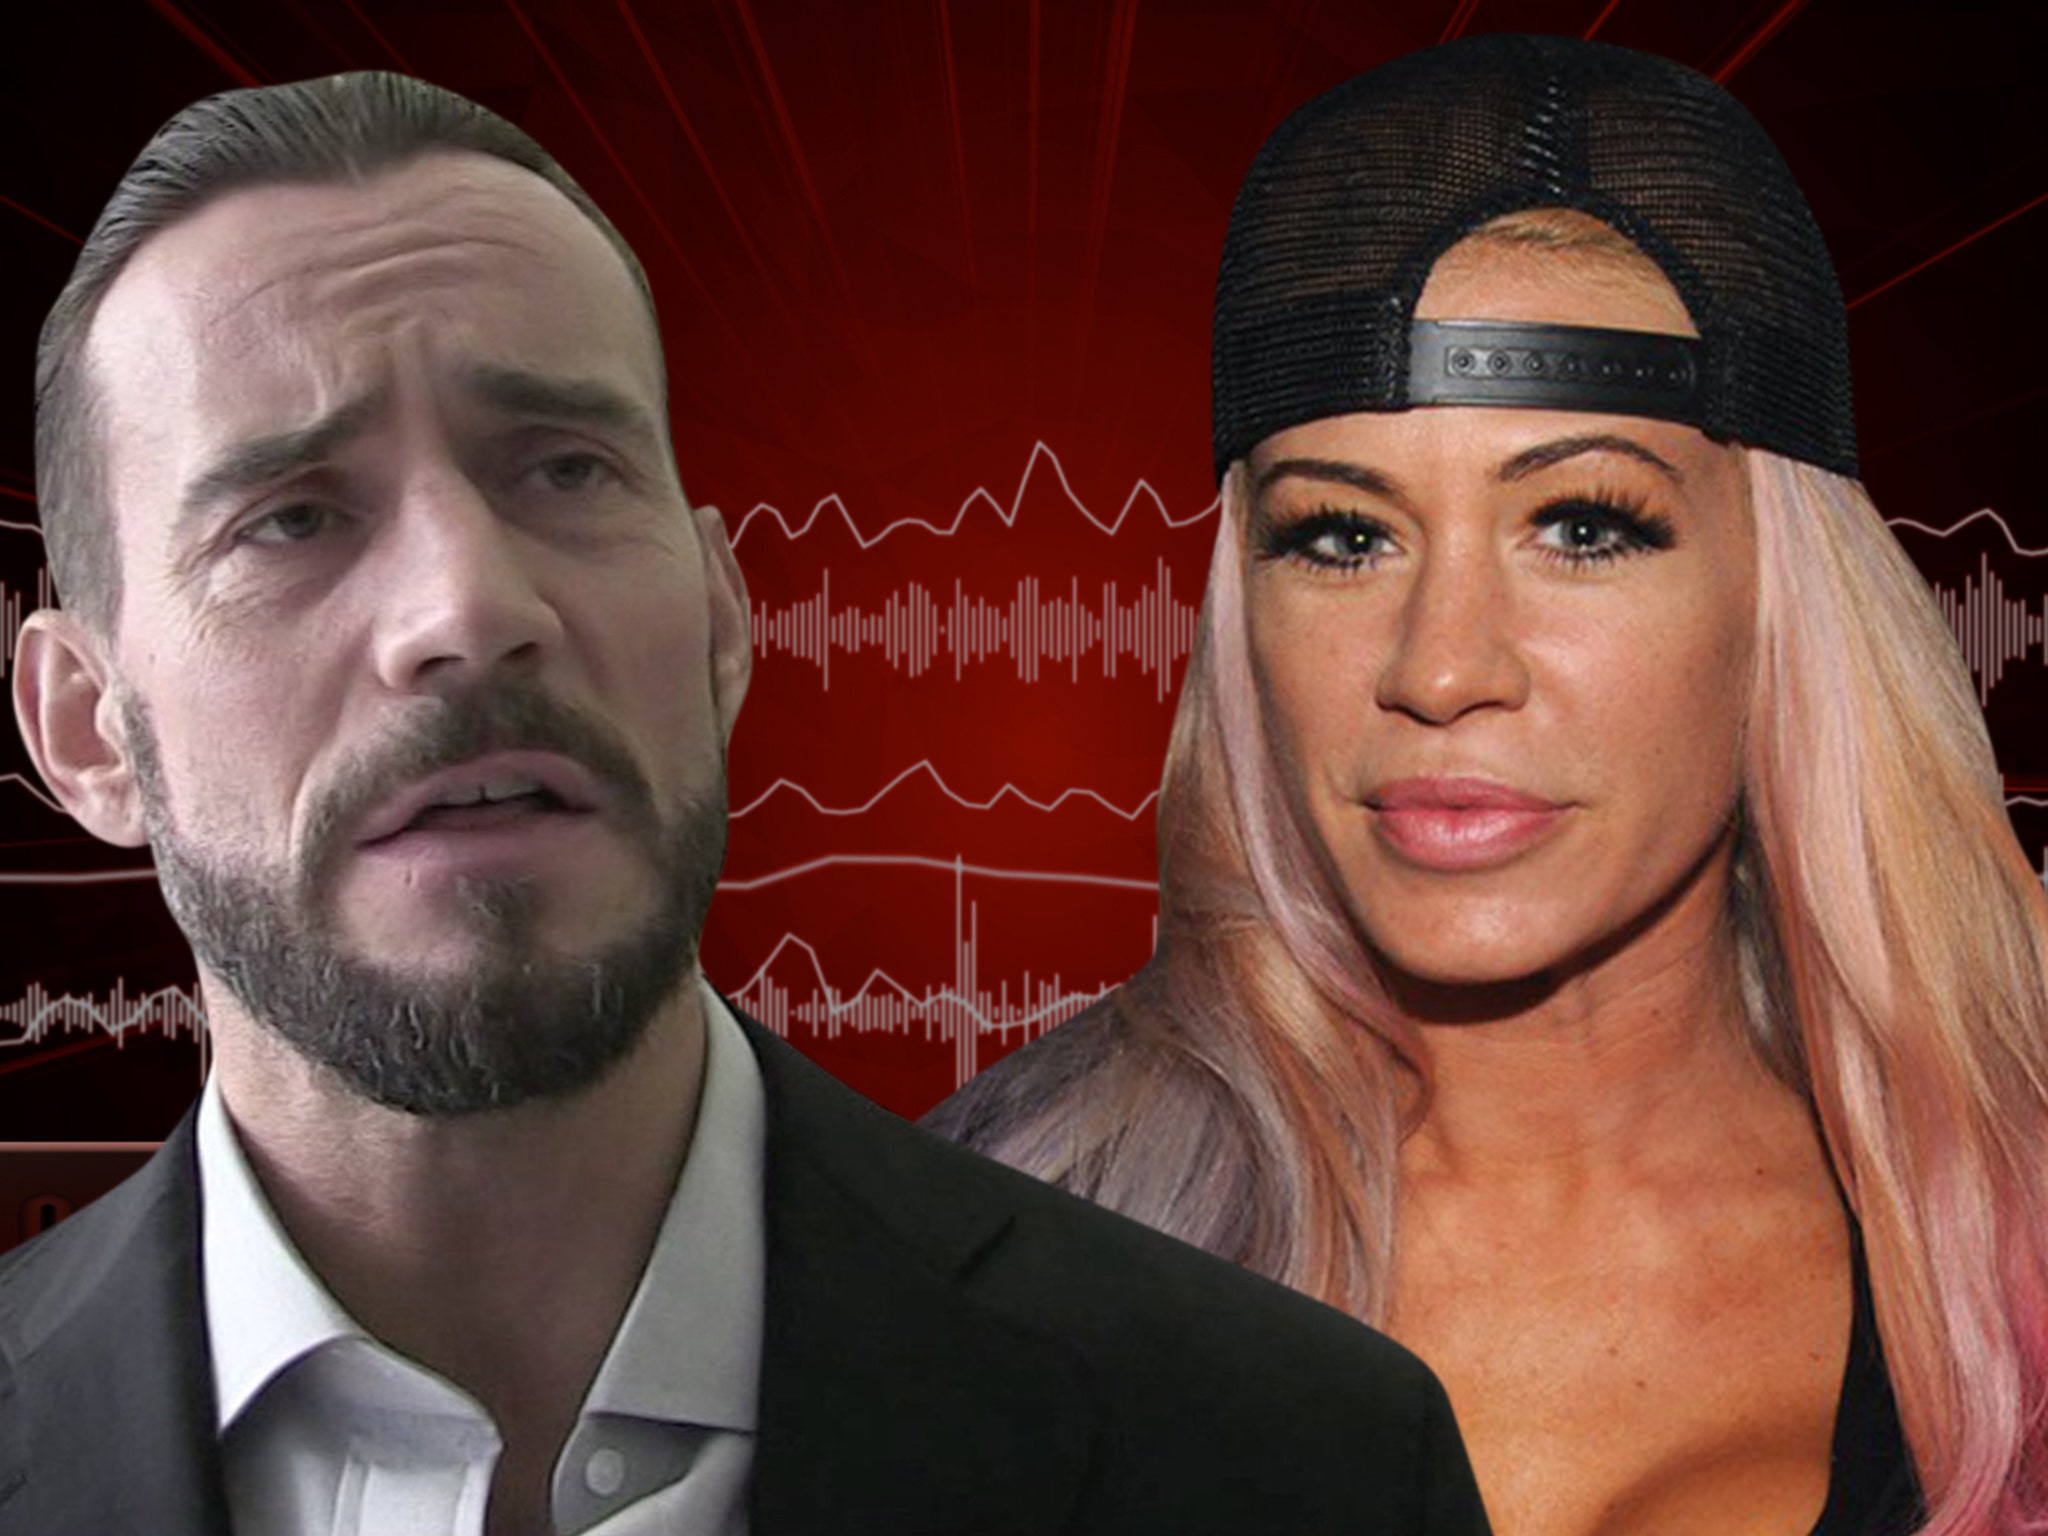 Ashley Massaro Died By Hanging In Apparent Suicide